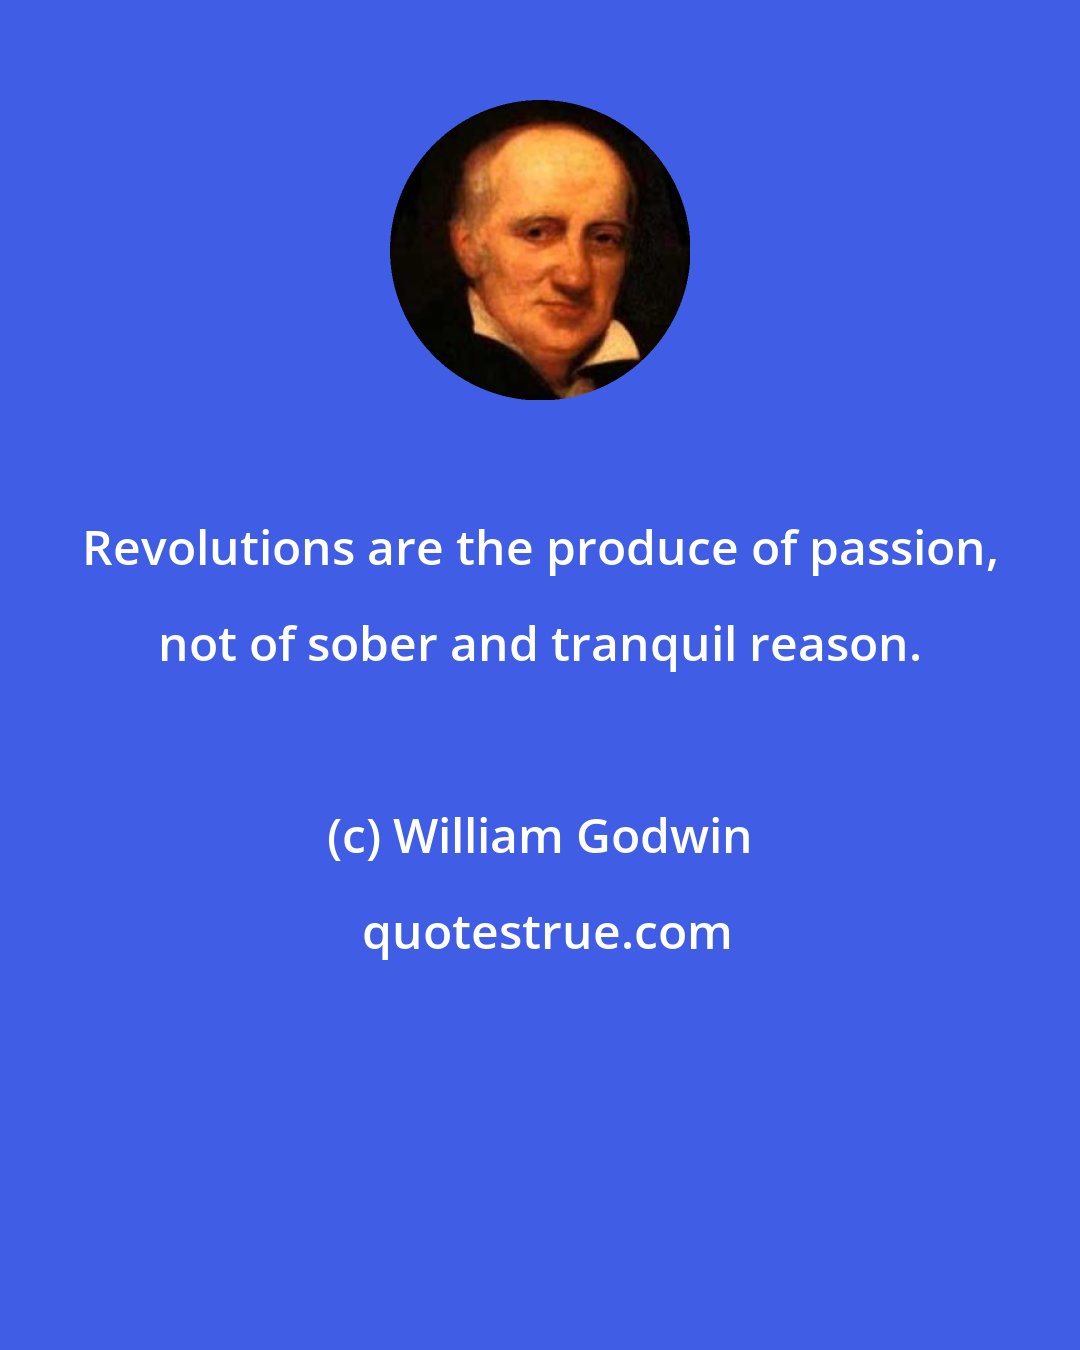 William Godwin: Revolutions are the produce of passion, not of sober and tranquil reason.